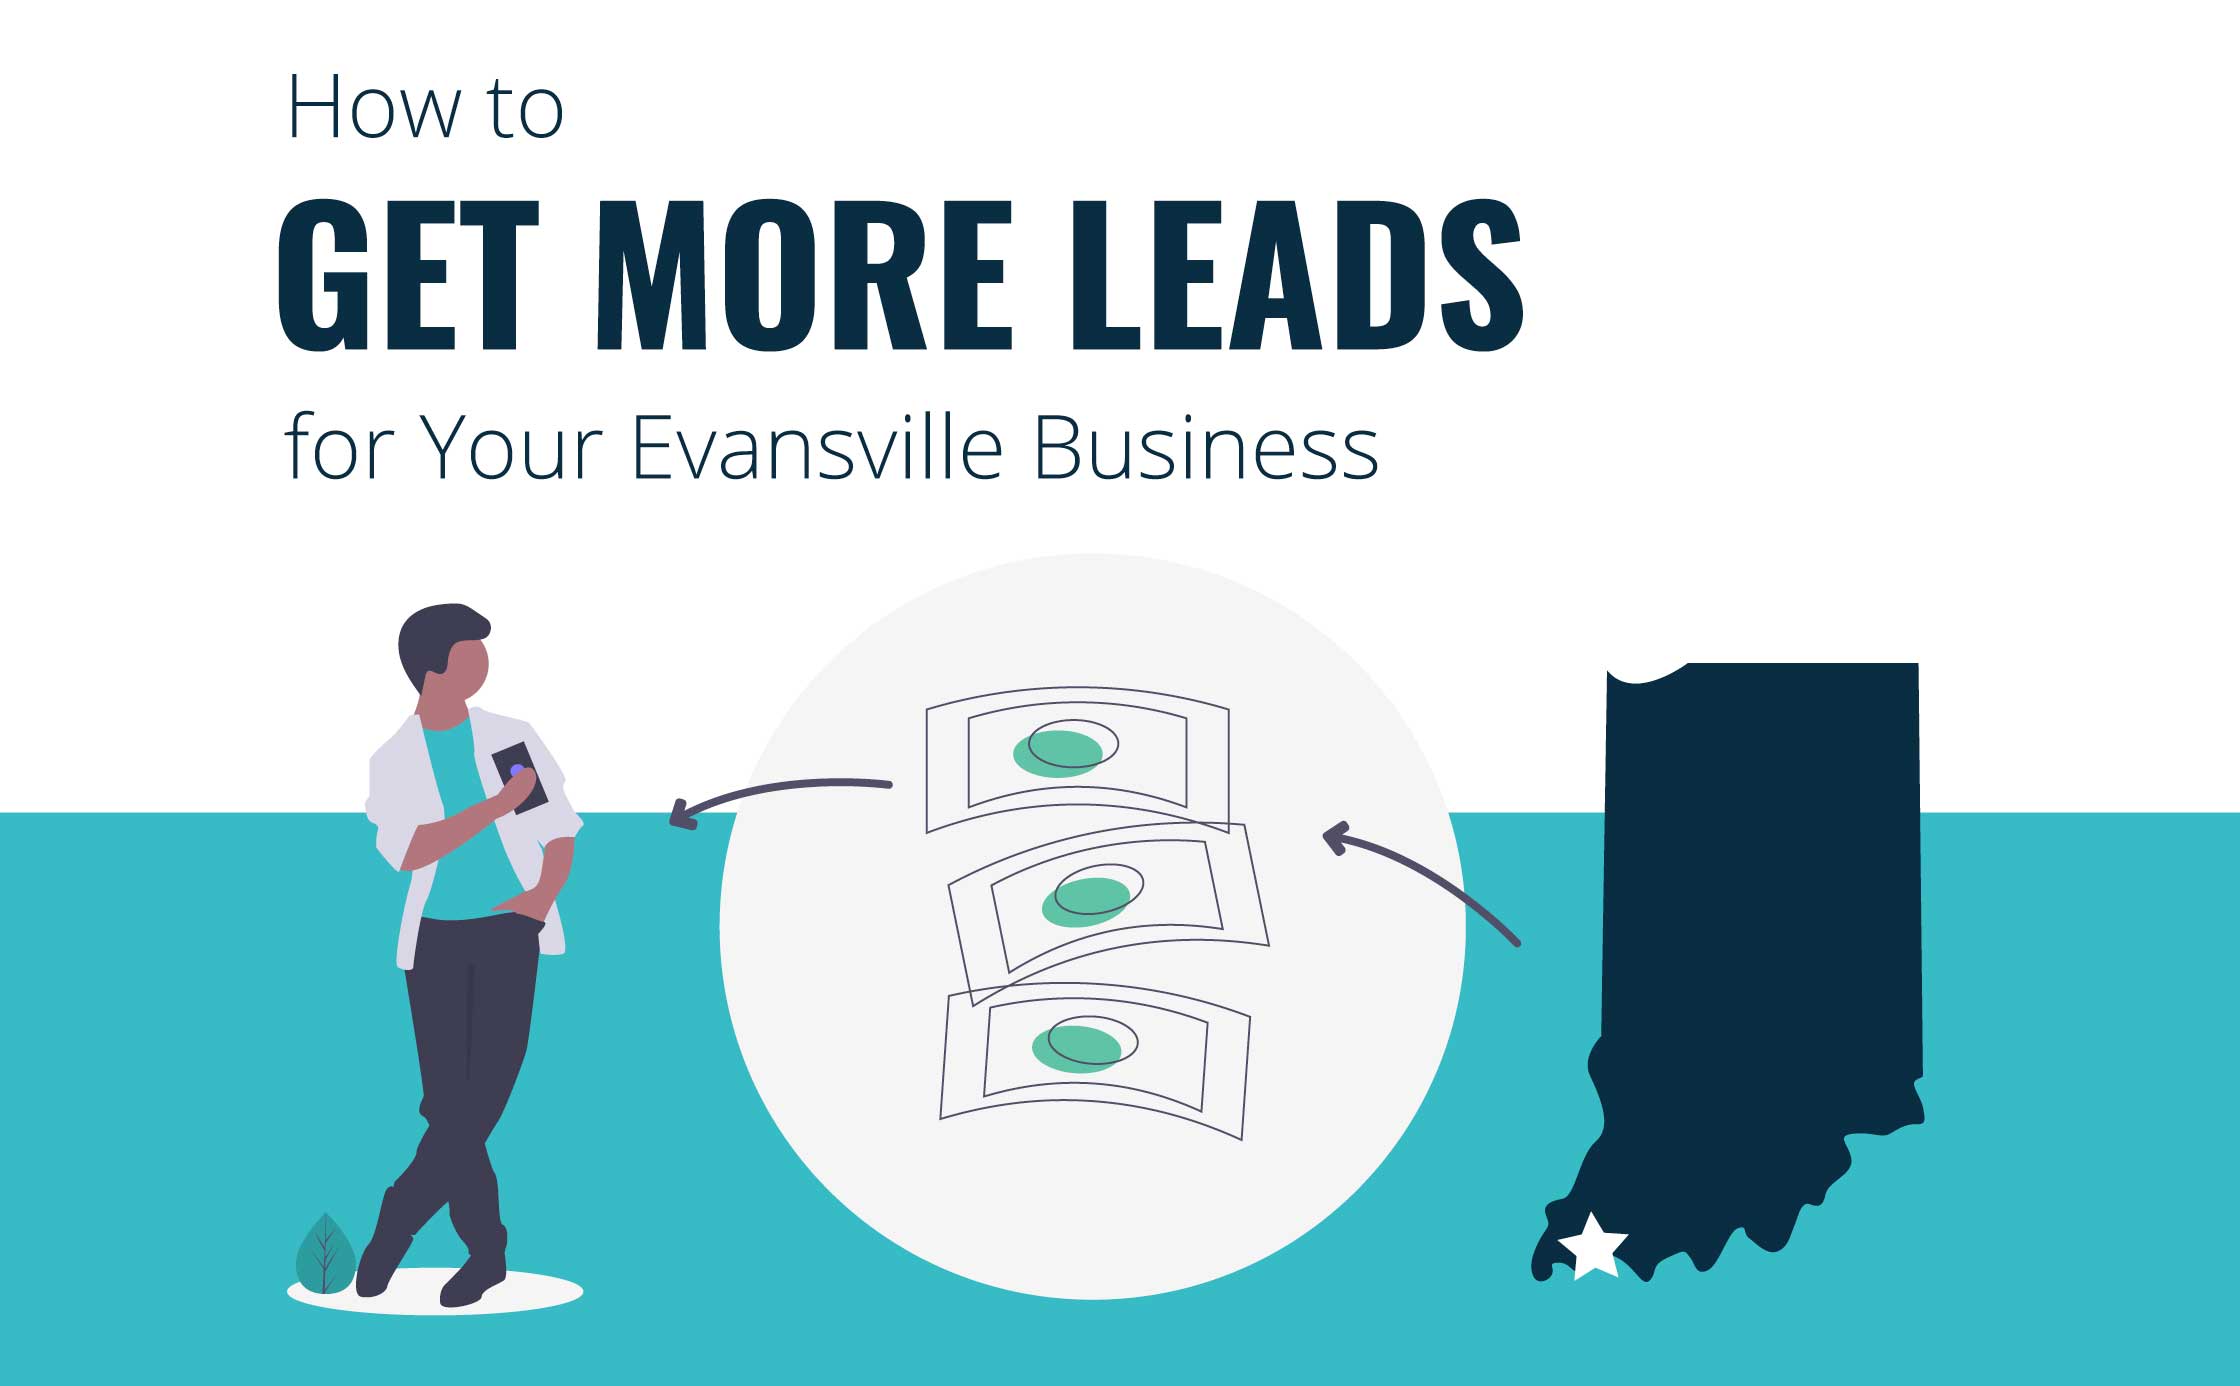 How-to-Get-More-Leads-Evansville-Business